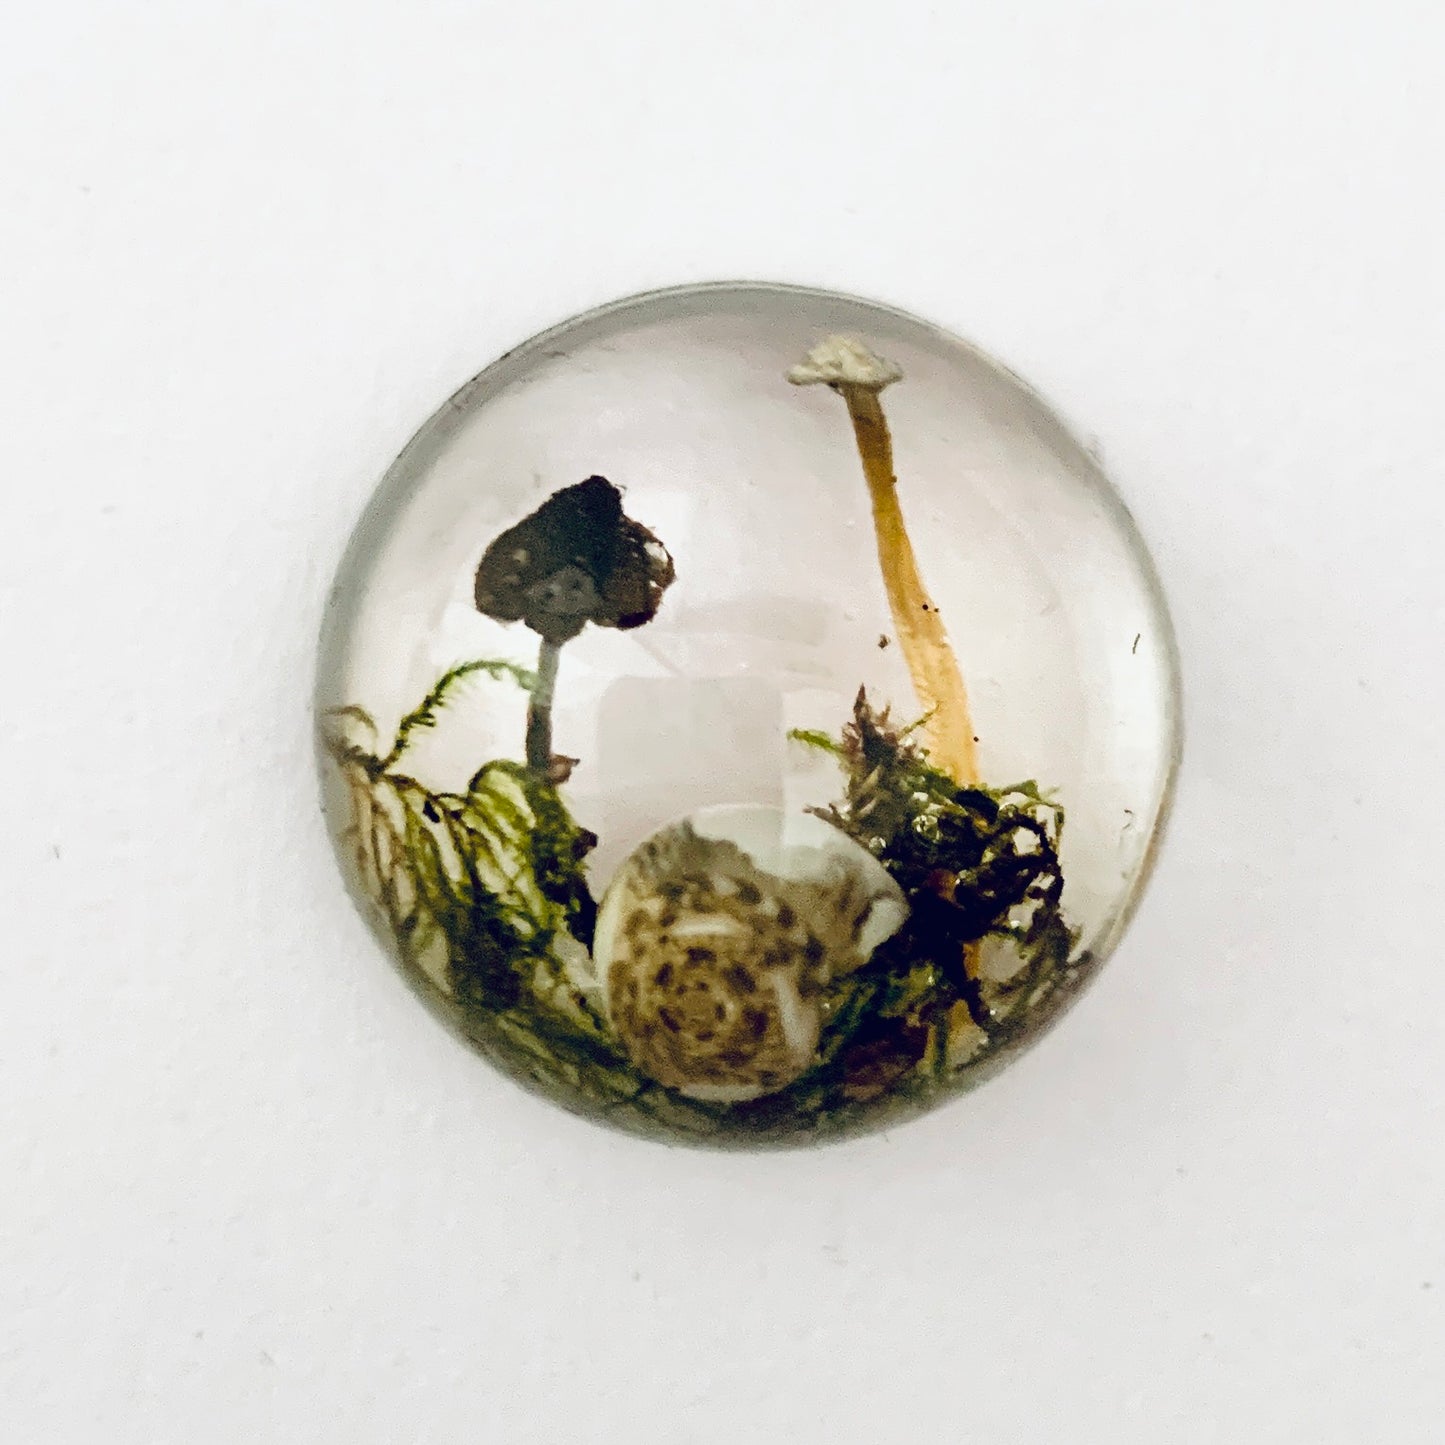 Mushroom Cabochon - The Forest, Frozen in Time